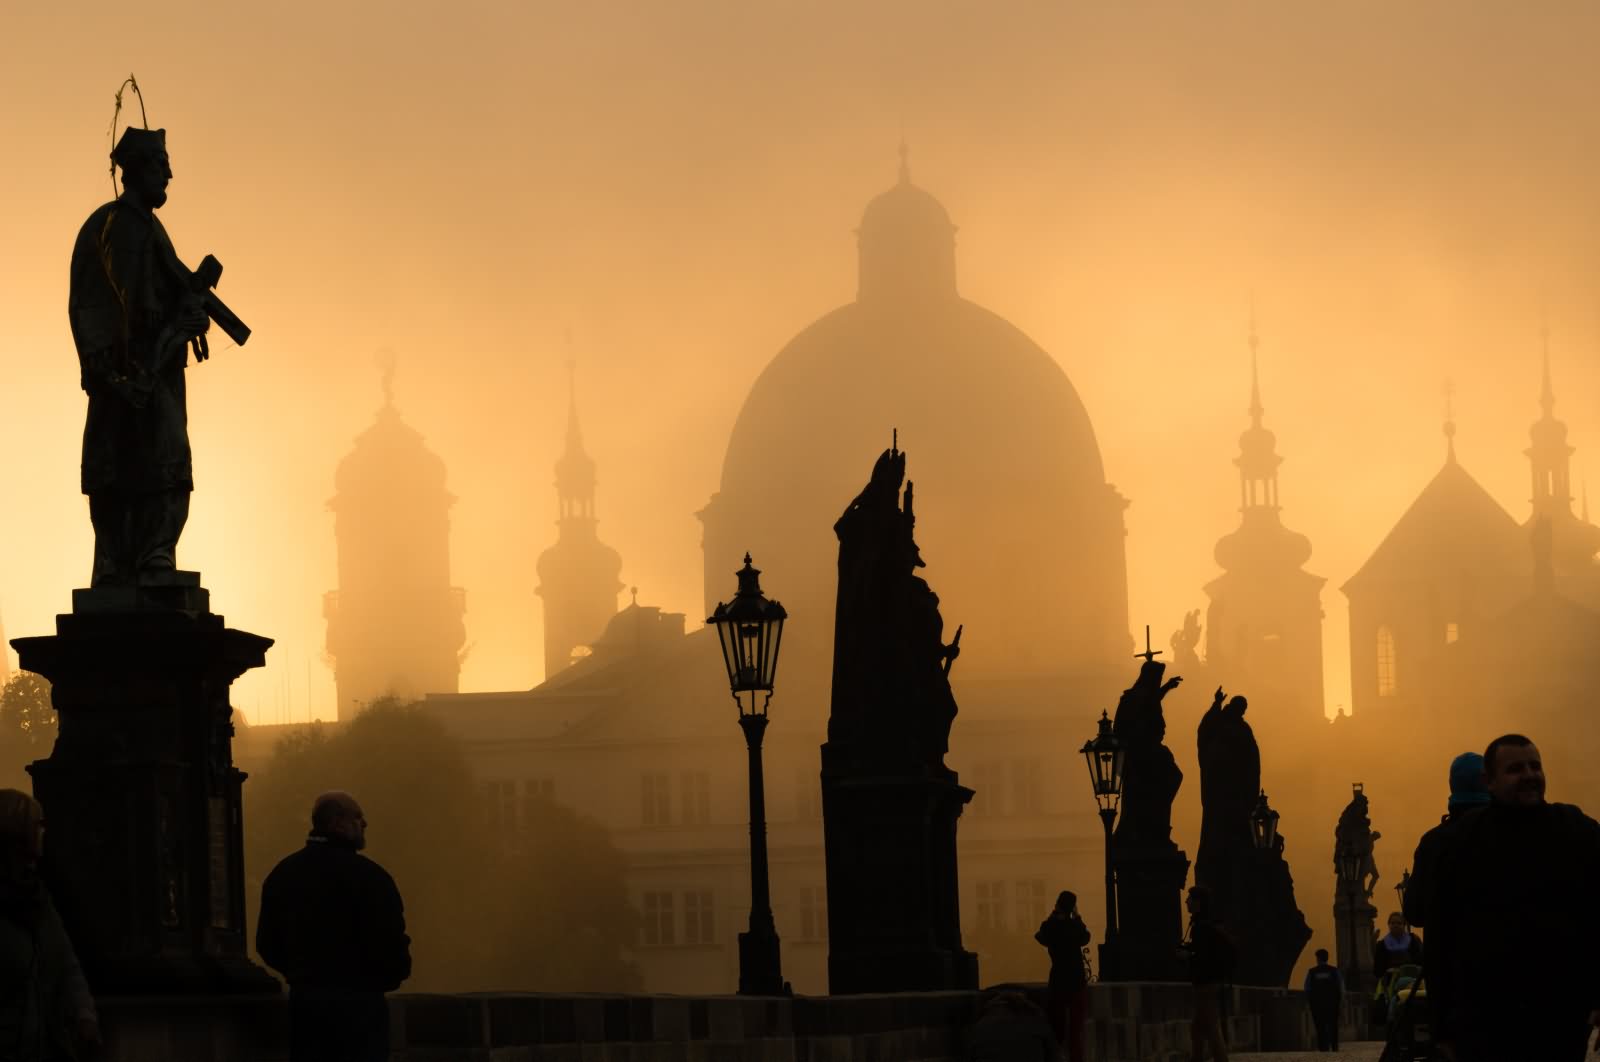 Silhouette View Of Statues On The Charles Bridge